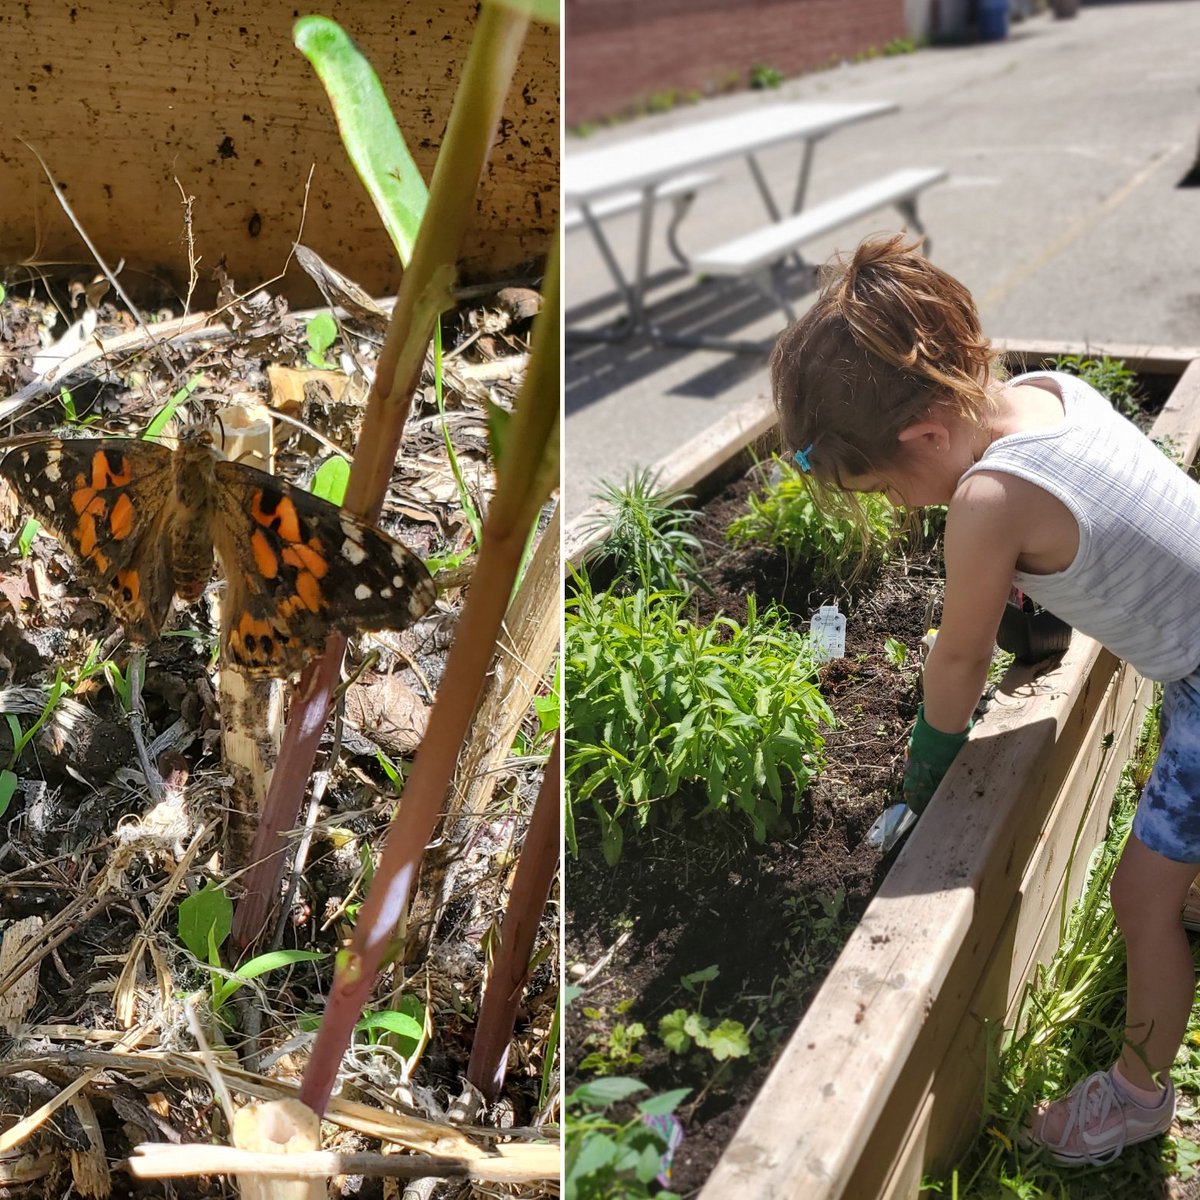 Room One released some painted lady butterflies while planting our pollinator plants! Thank you #cwfwildspaces!!